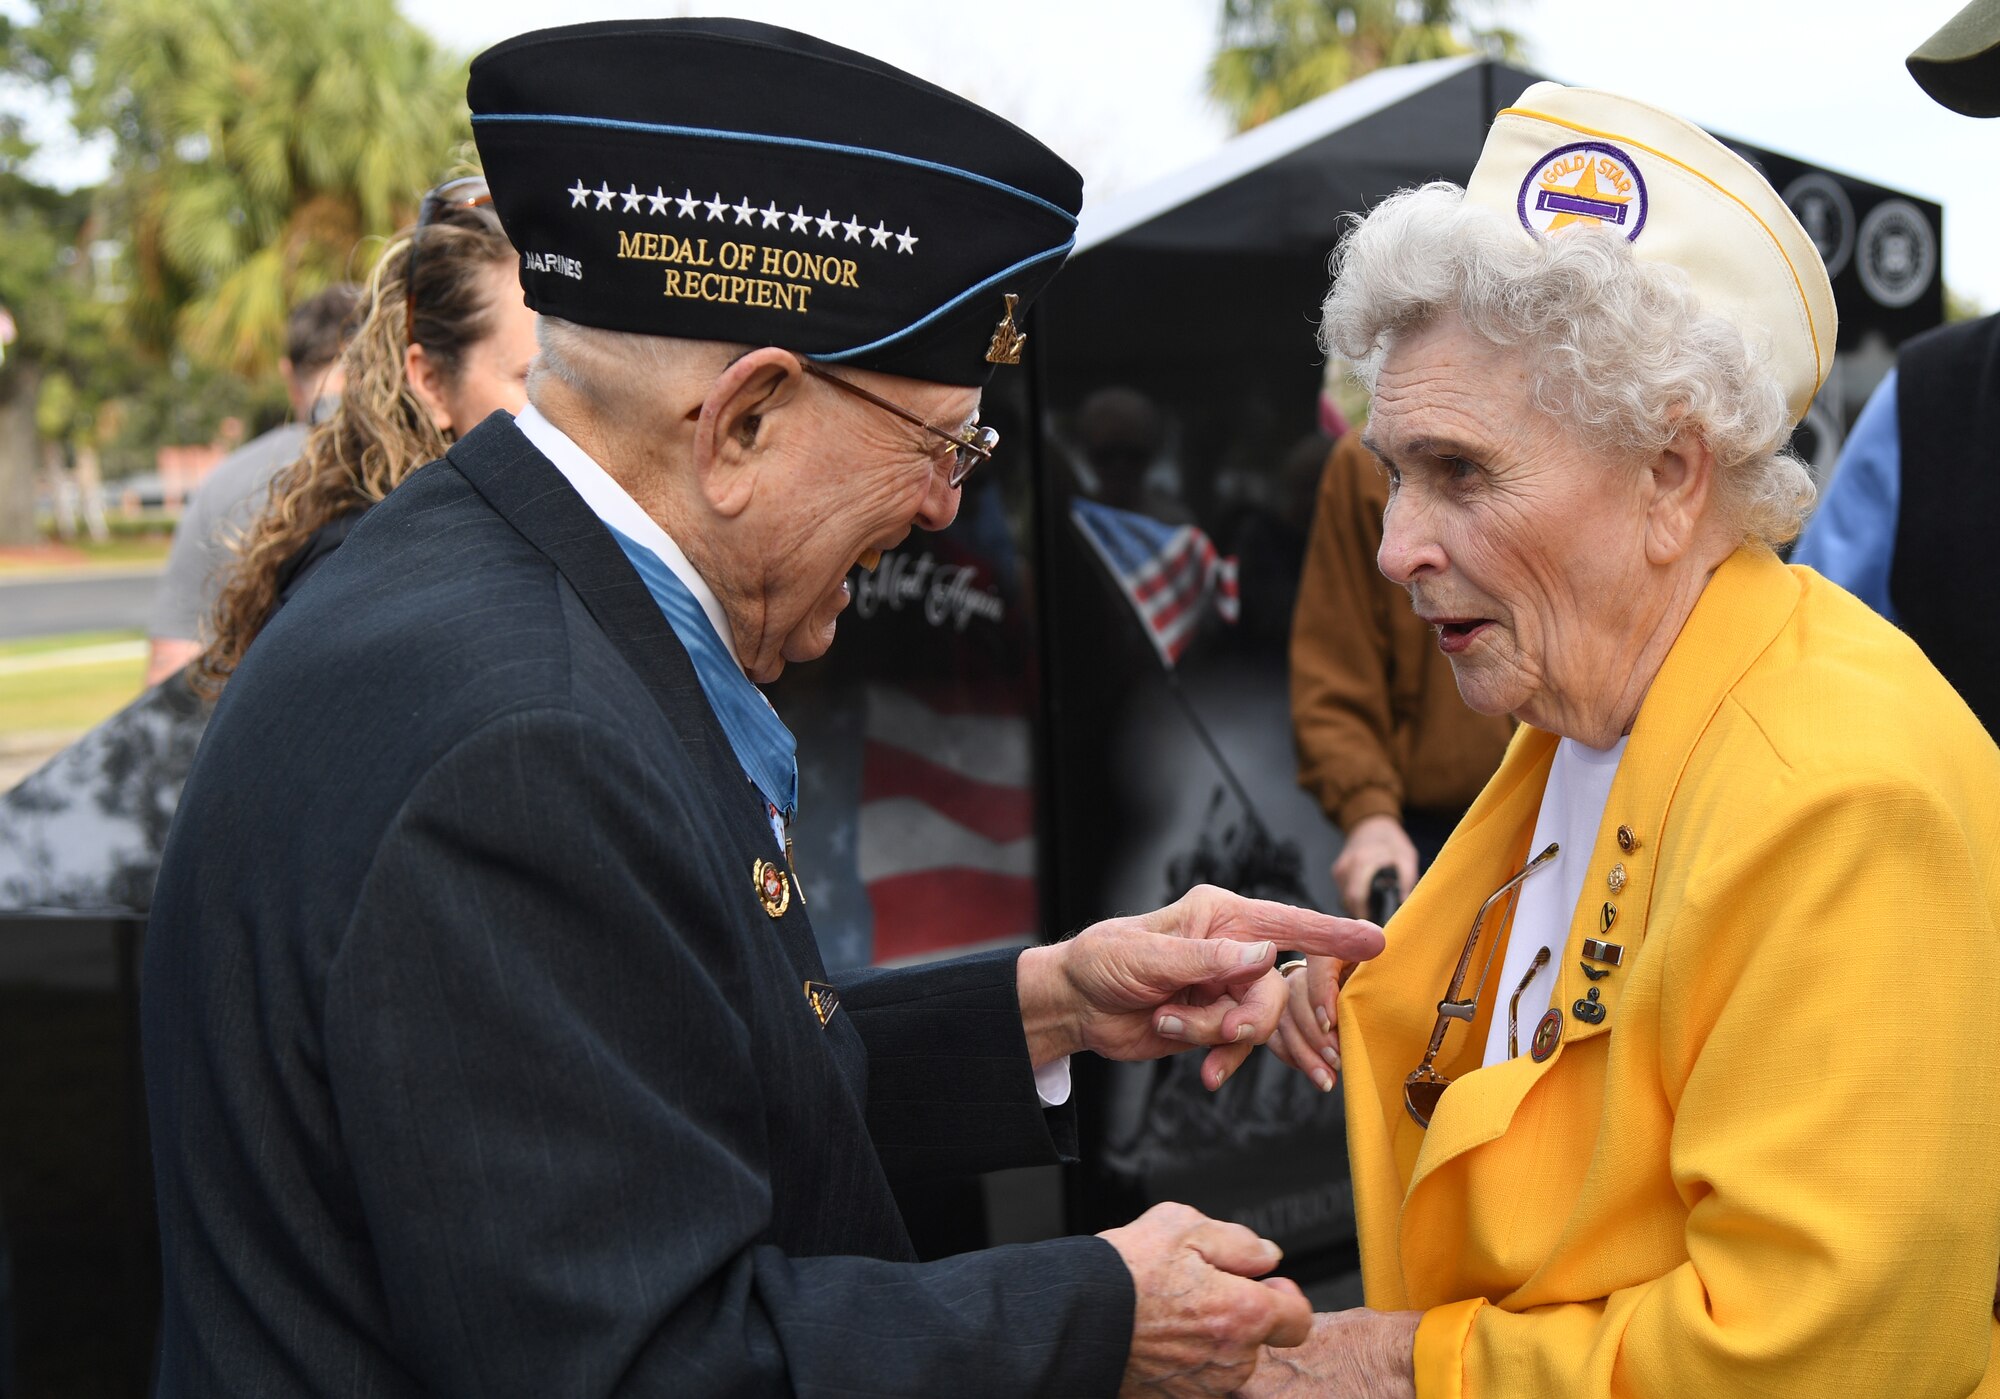 U.S. Marine retired Warrant Officer Hershel "Woody" Williams, World War II Medal of Honor recipient, speaks with Emily Crowder, spouse of U.S. Army retired Maj. Albert Crowder, during the Gold Star Families Memorial Monument dedication ceremony at Guice Veterans Memorial Park in Biloxi, Mississippi, Nov. 23, 2019. The monument honors families of service men and women who sacrificed their lives while serving in the military. (U.S. Air Force photo by Kemberly Groue)